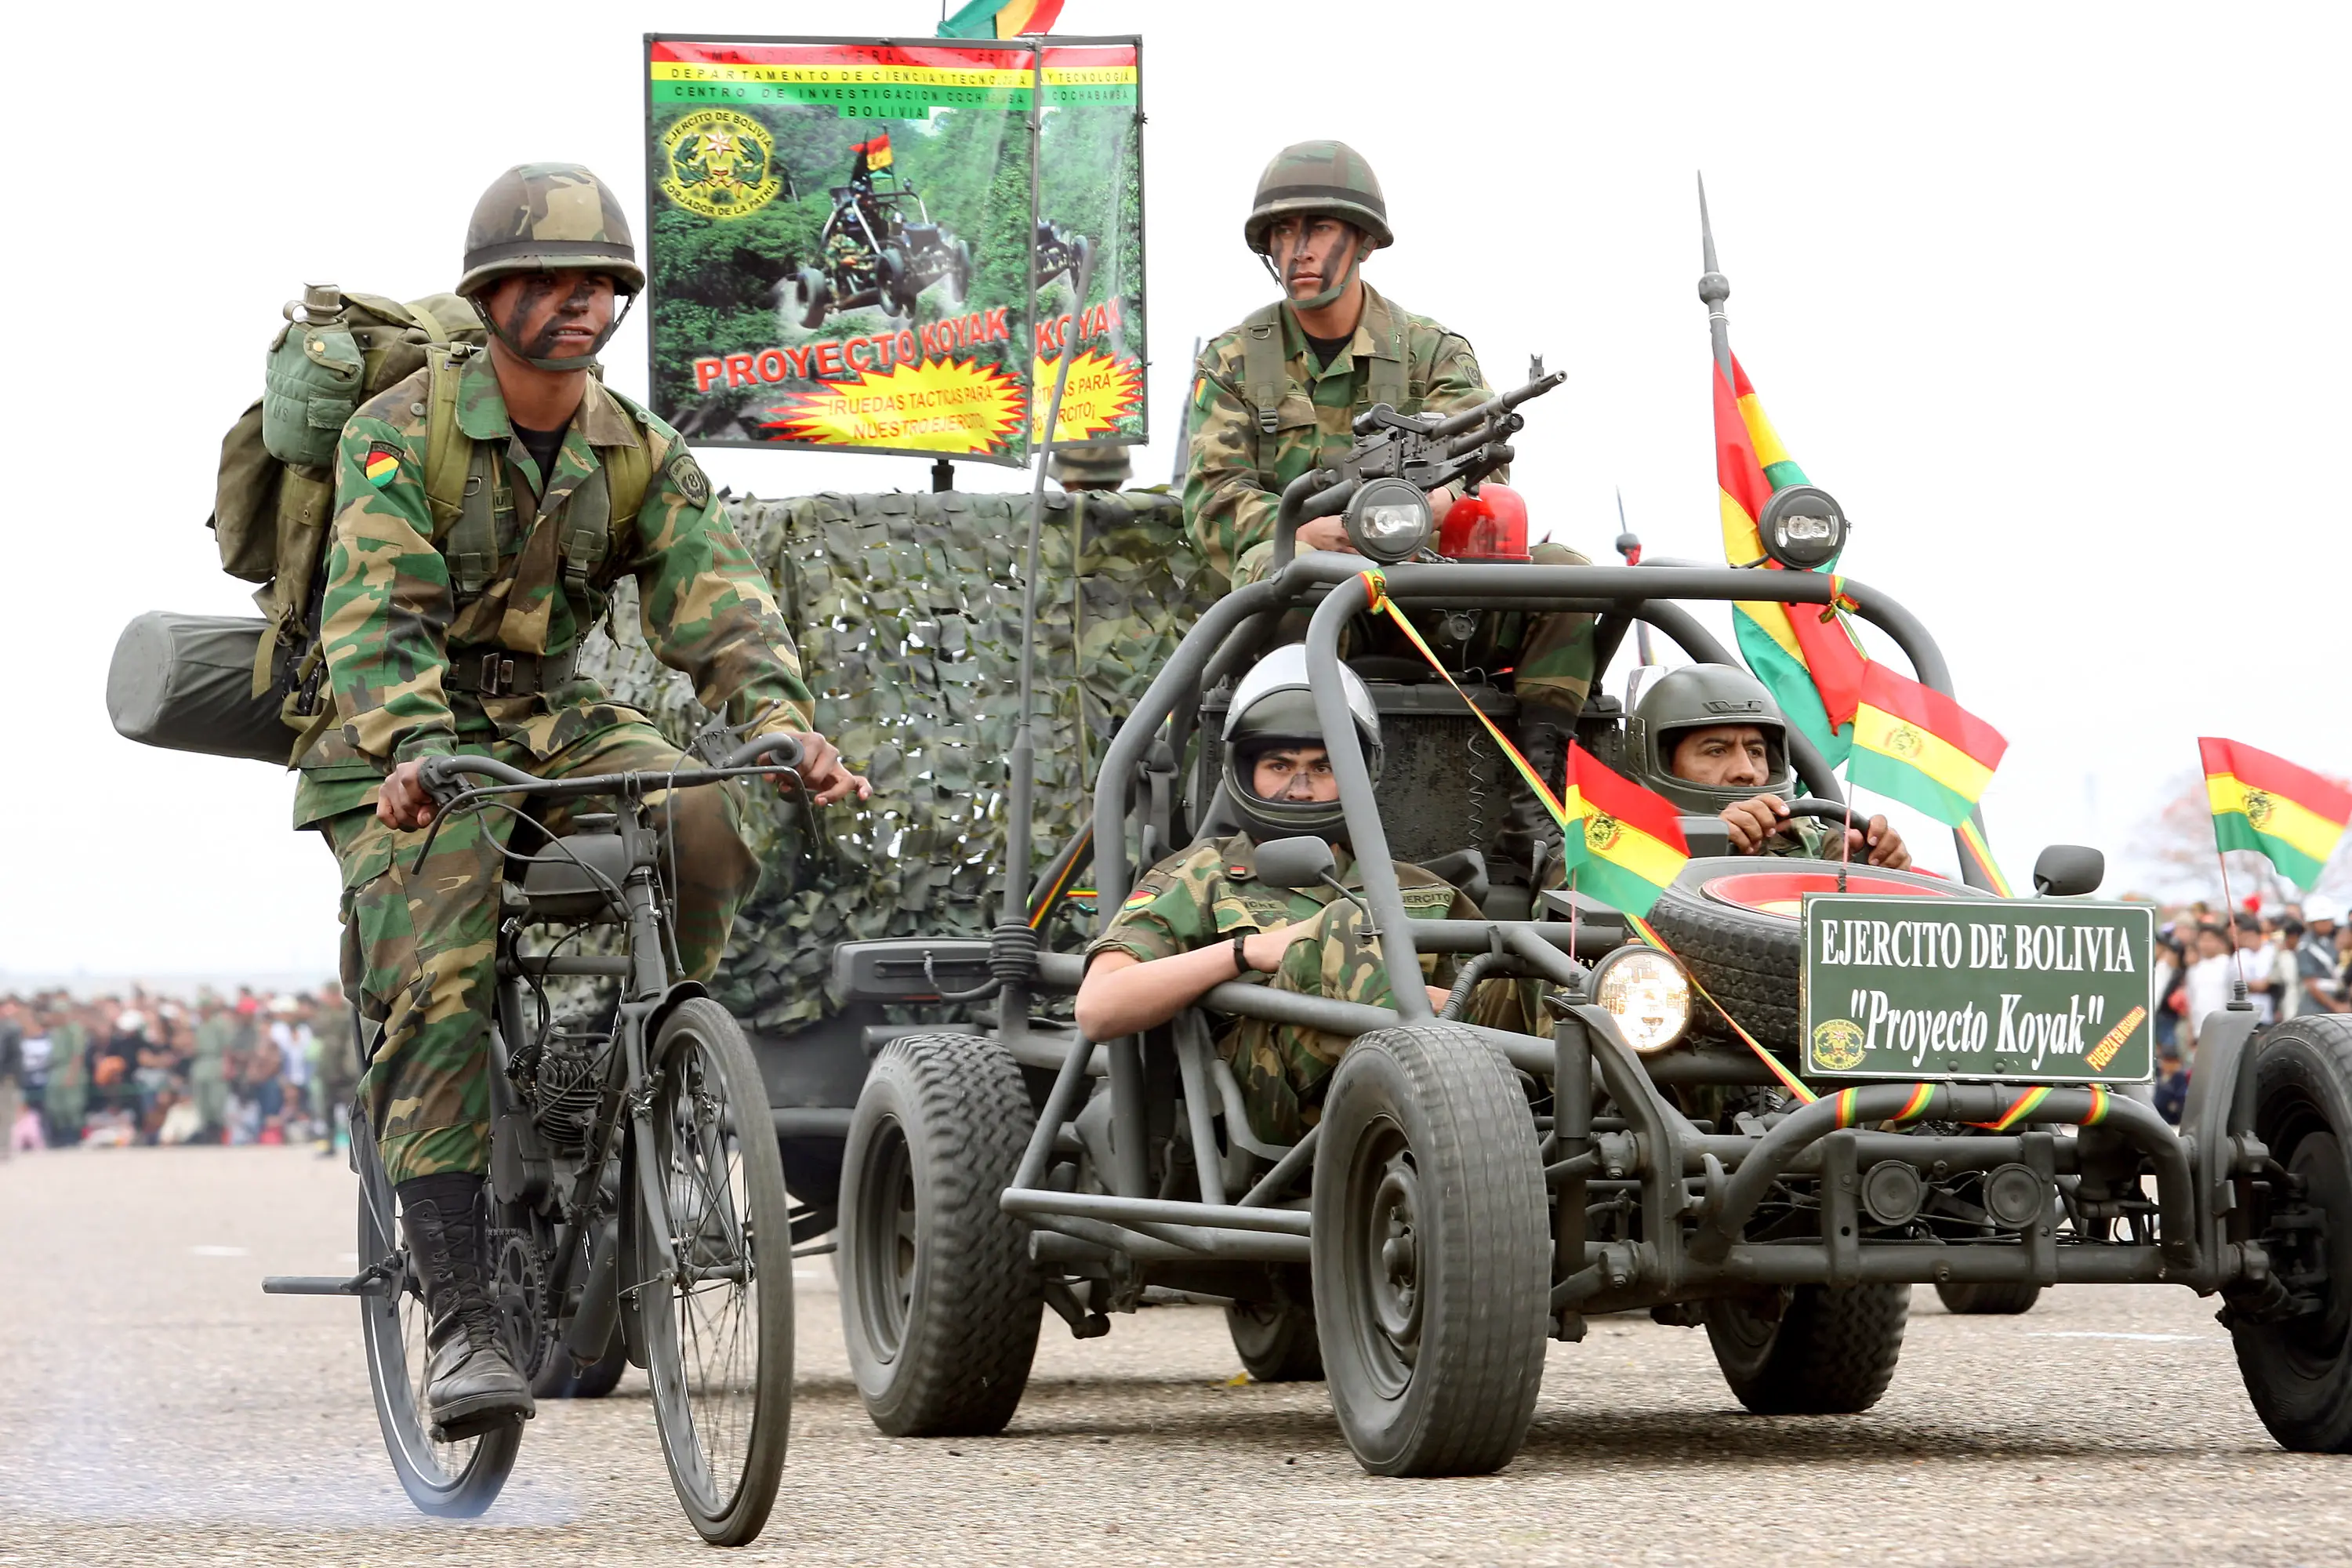 http://www.armyrecognition.com/images/stories/south_america/bolivia/ranks_uniforms/uniforms/pictures/Bolivian_army_Bolivia_soldiers_land_forces_combat-uniforms_003.jpg